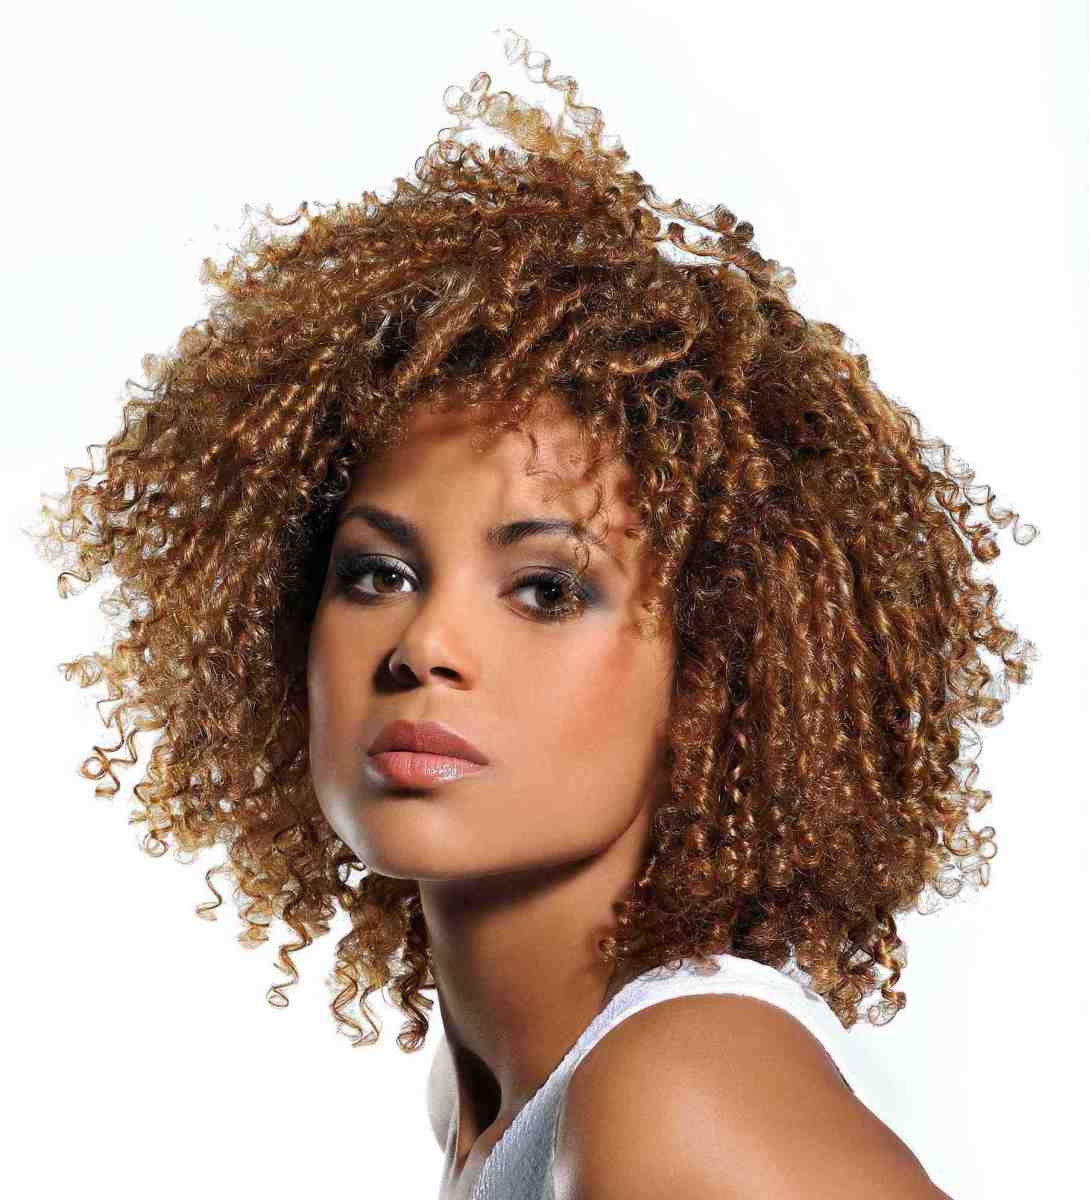 Naturally Curly Hair Hairstyles
 Looking after mixed race curls